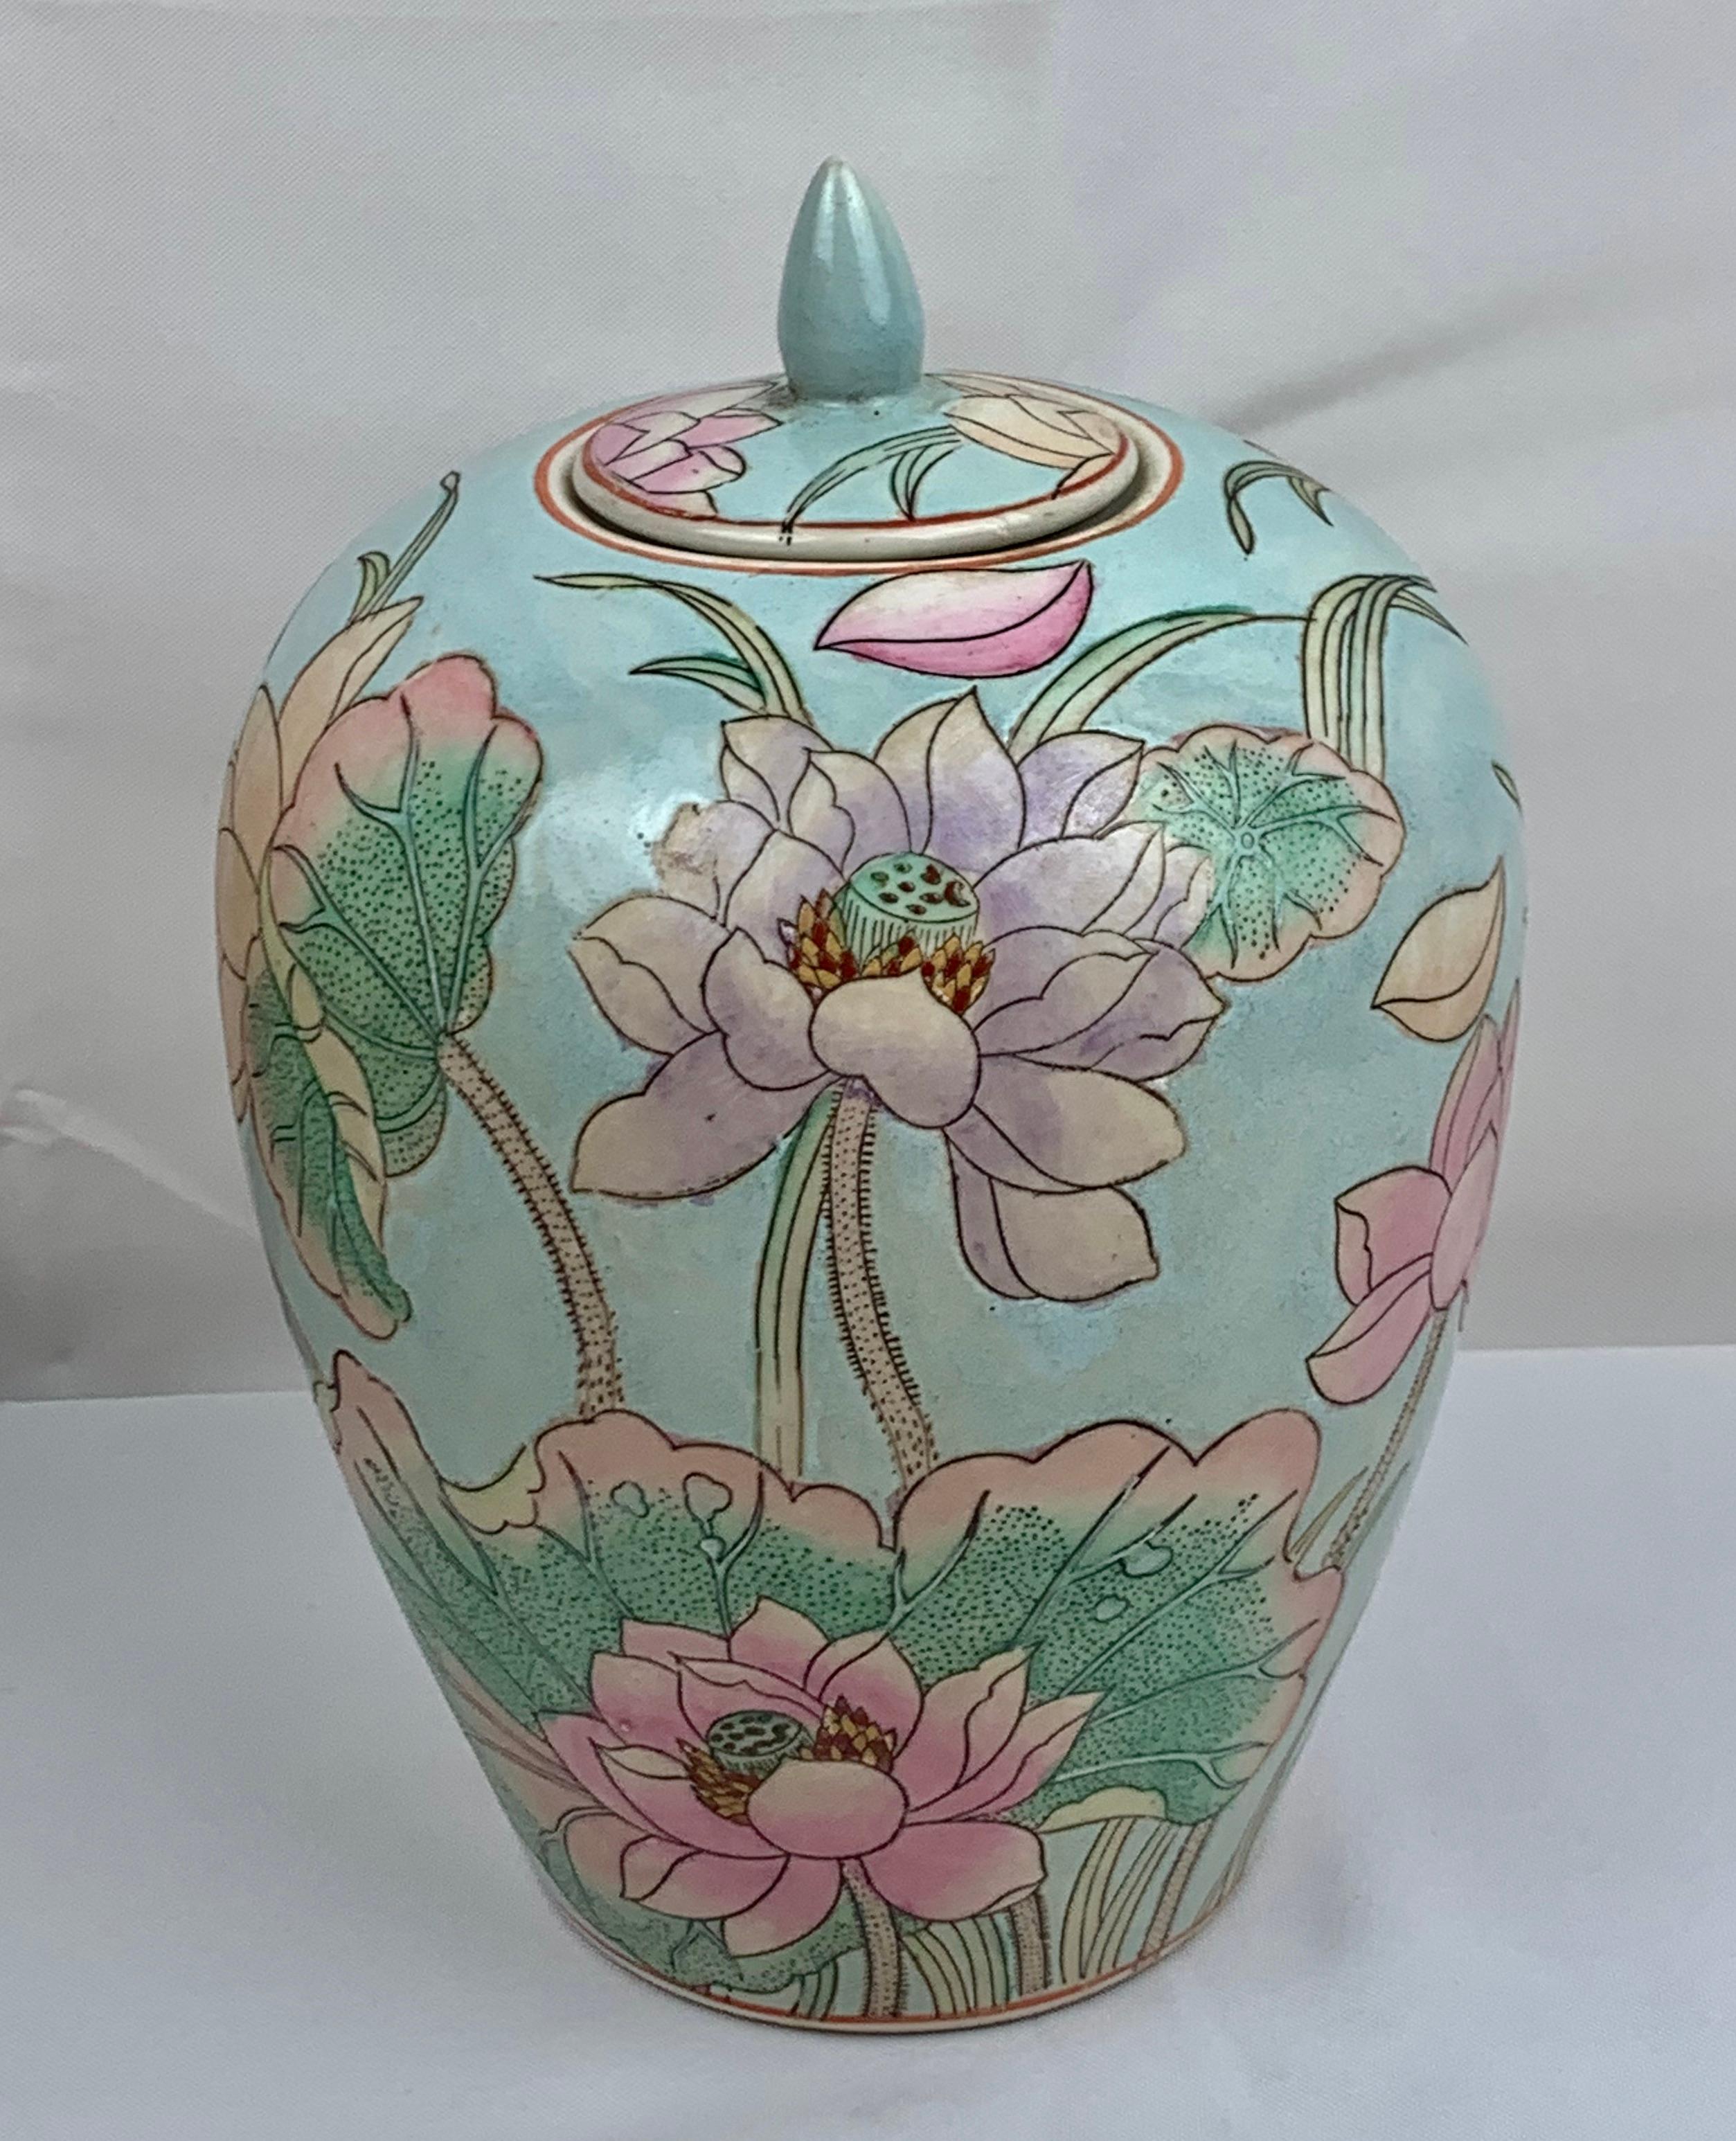 Ginger jar with lid hand painted in pastel colors. The motif is of exotic lotus blossoms on a pale aqua ground. This porcelain vessel could also be used as a vase, however, it stands alone as a decorative accessory.
Measures: H-10